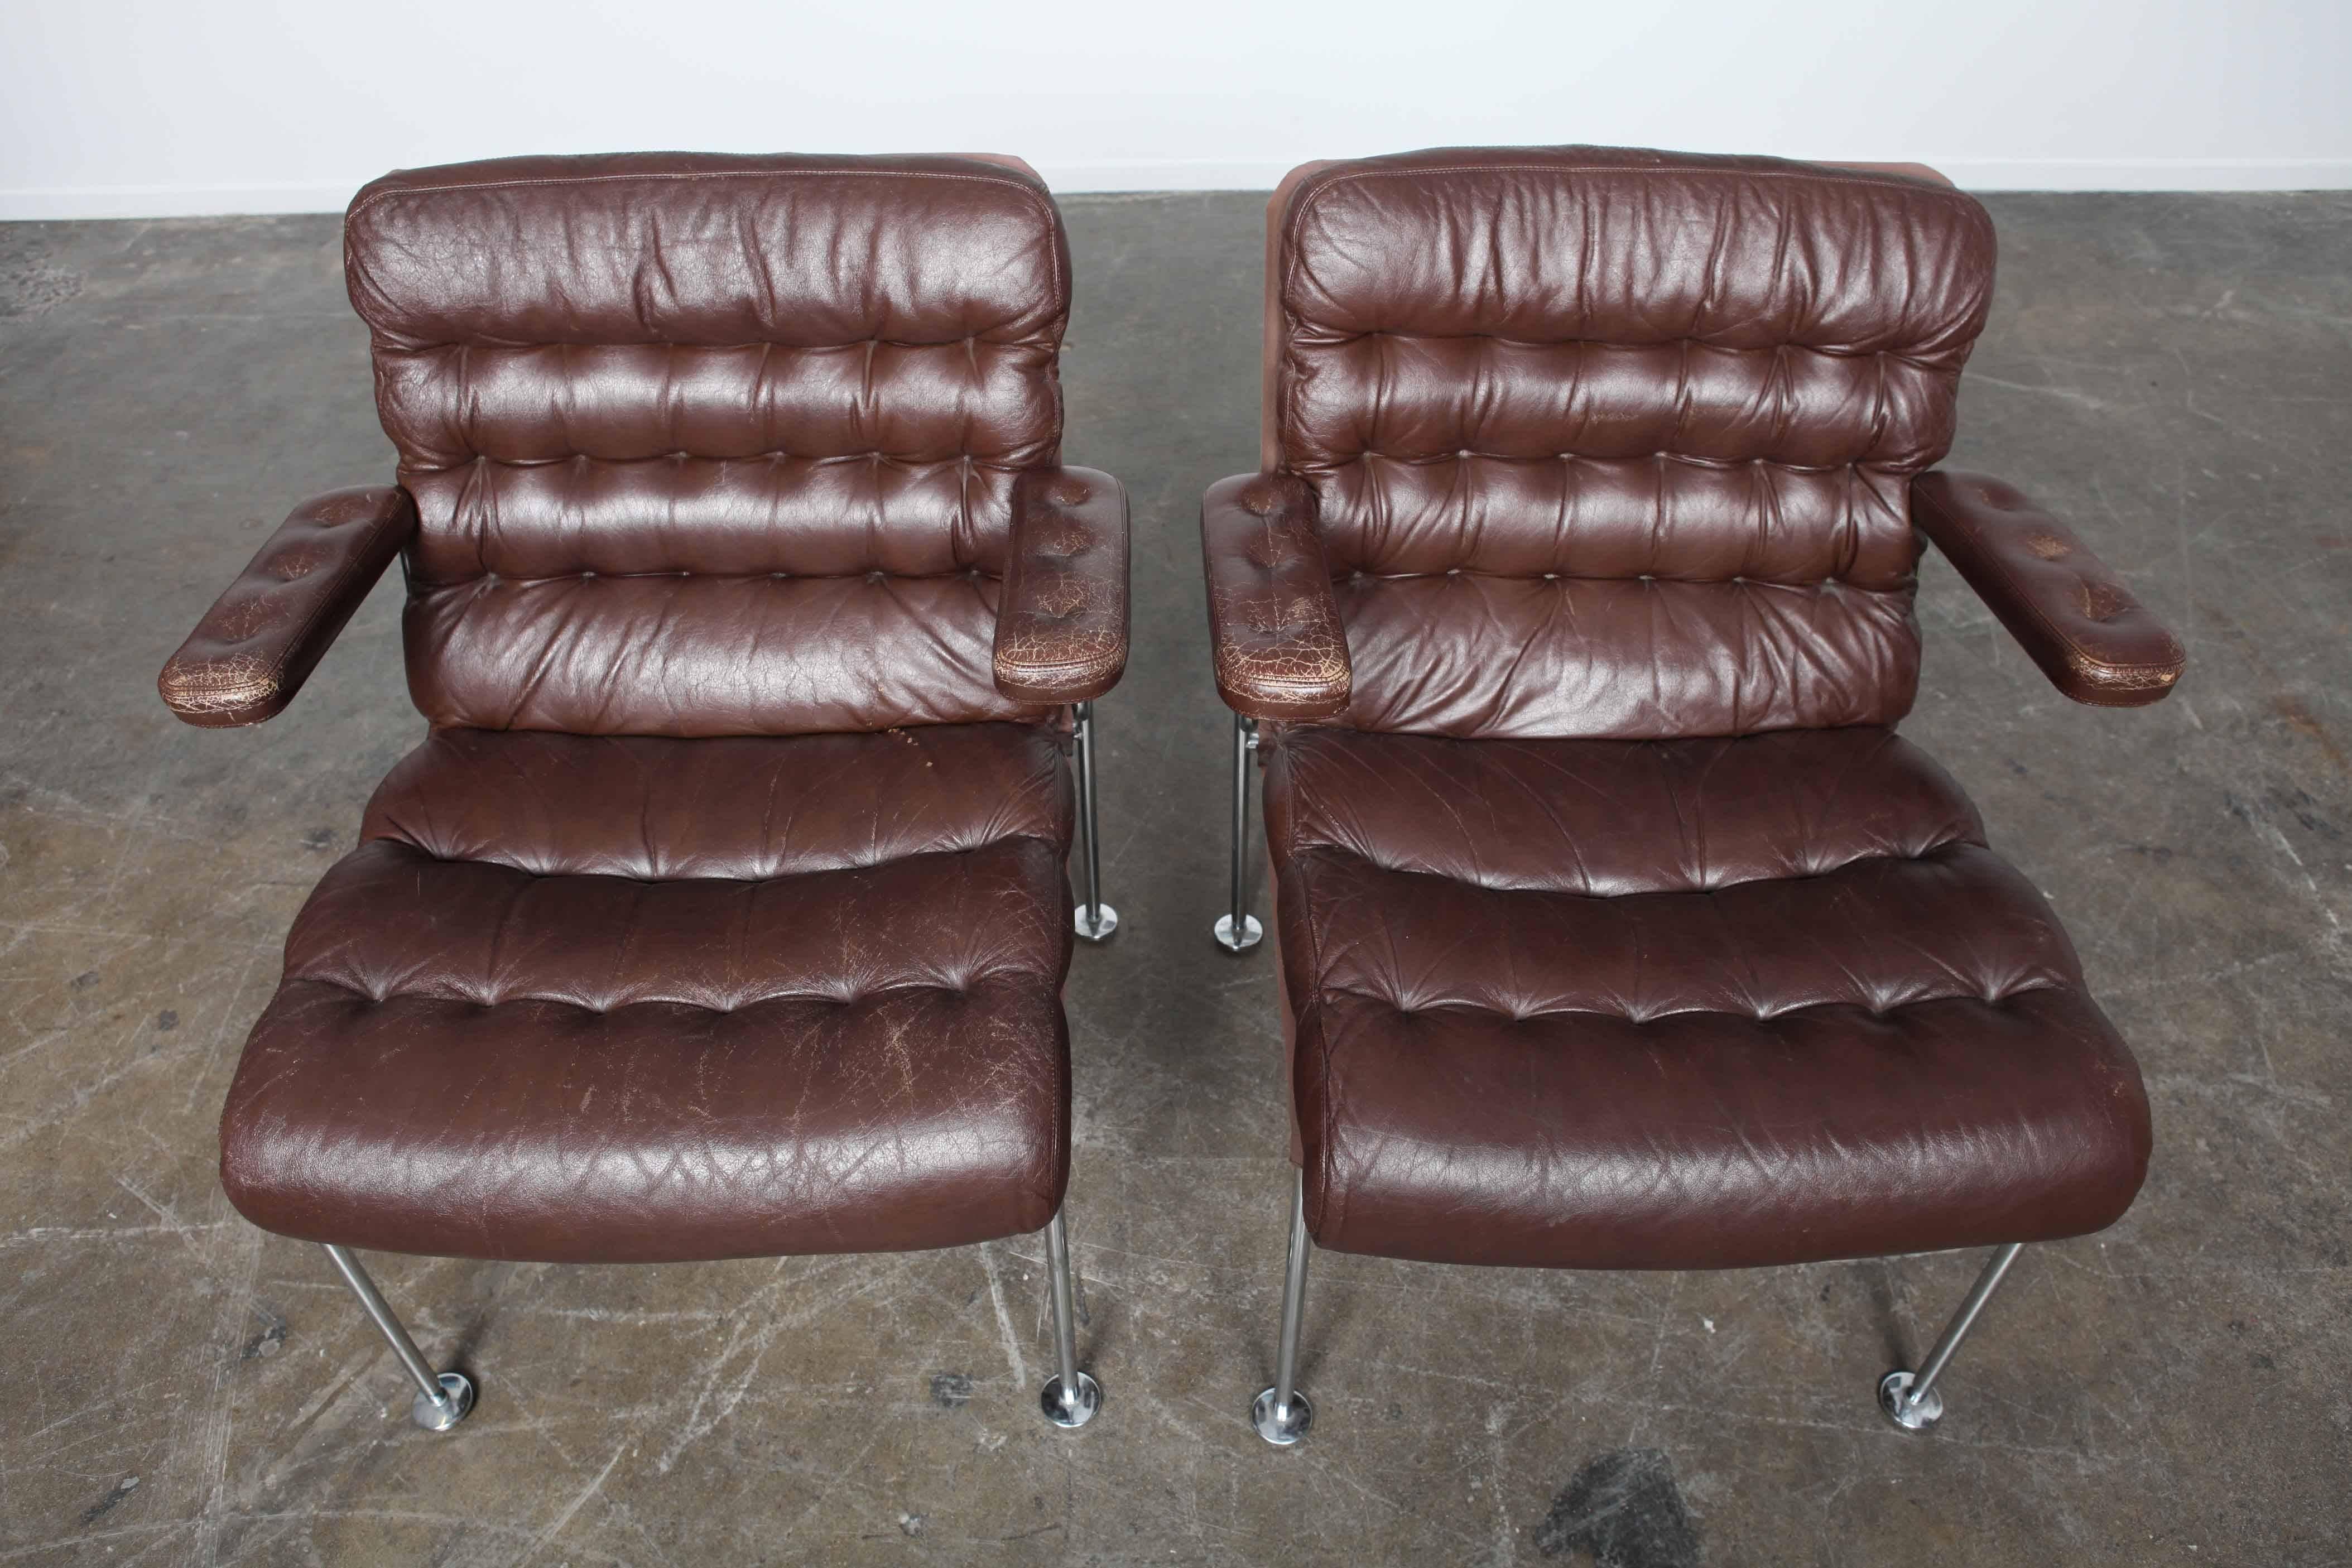 Pair of brown tufted original leather and metal framed chairs designed by Bruno Mathsson for DUX, model 